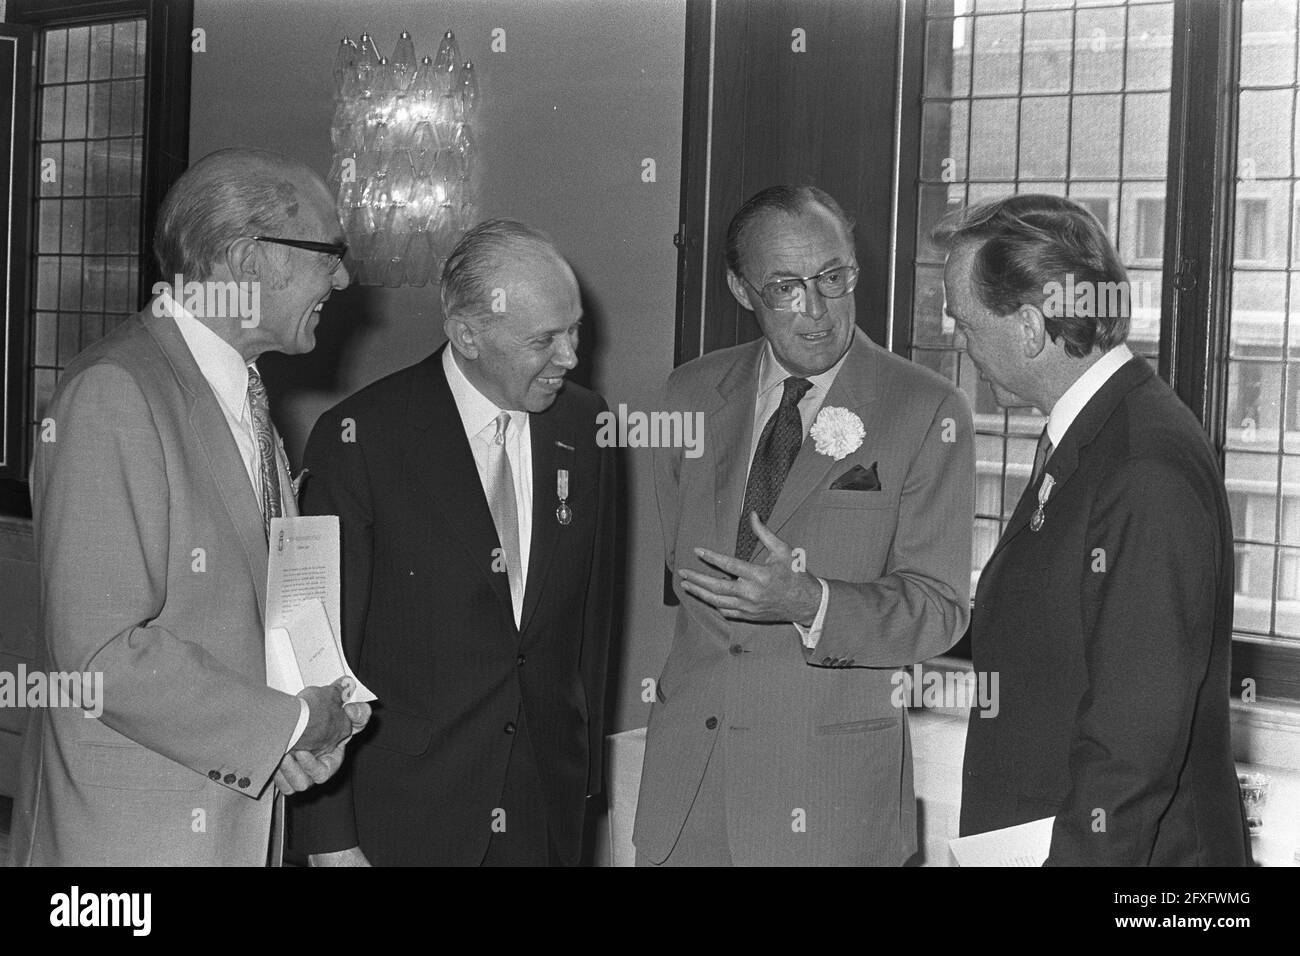 From left to right Mr. Frans Nieuwboer, Mr. M. H. Gans, Prince Bernhard and Mr. L. G. le Roy, during the award ceremony in the Palace on the Dam in Amsterdam, June 27, 1972, awards, palaces, award ceremonies, princes, The Netherlands, 20th century press agency photo, news to remember, documentary, historic photography 1945-1990, visual stories, human history of the Twentieth Century, capturing moments in time Stock Photo